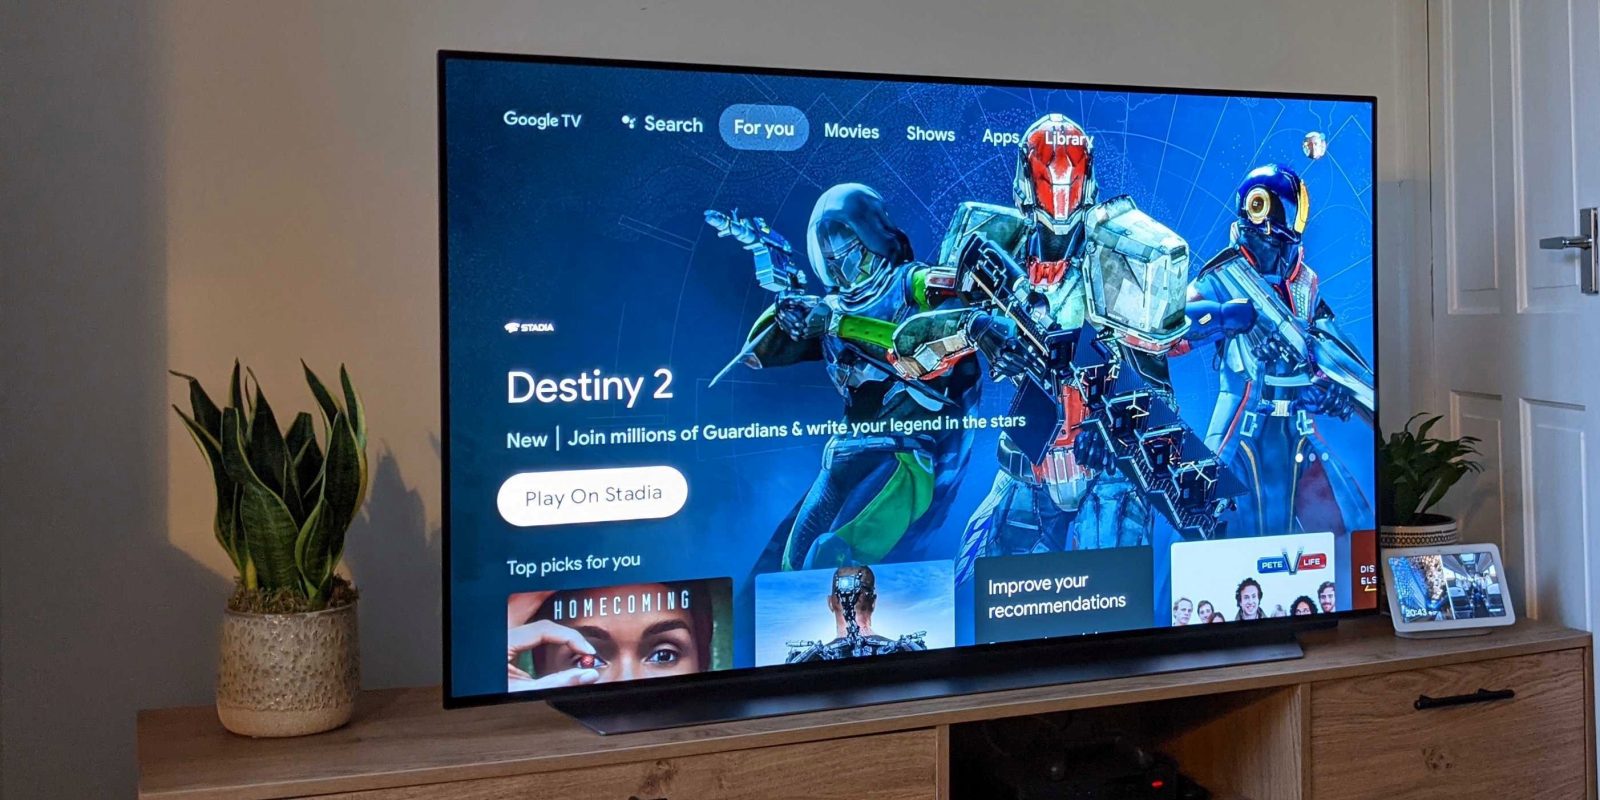 Google TV will bring the ability to hide movies, shows from ‘Continue watching’ row